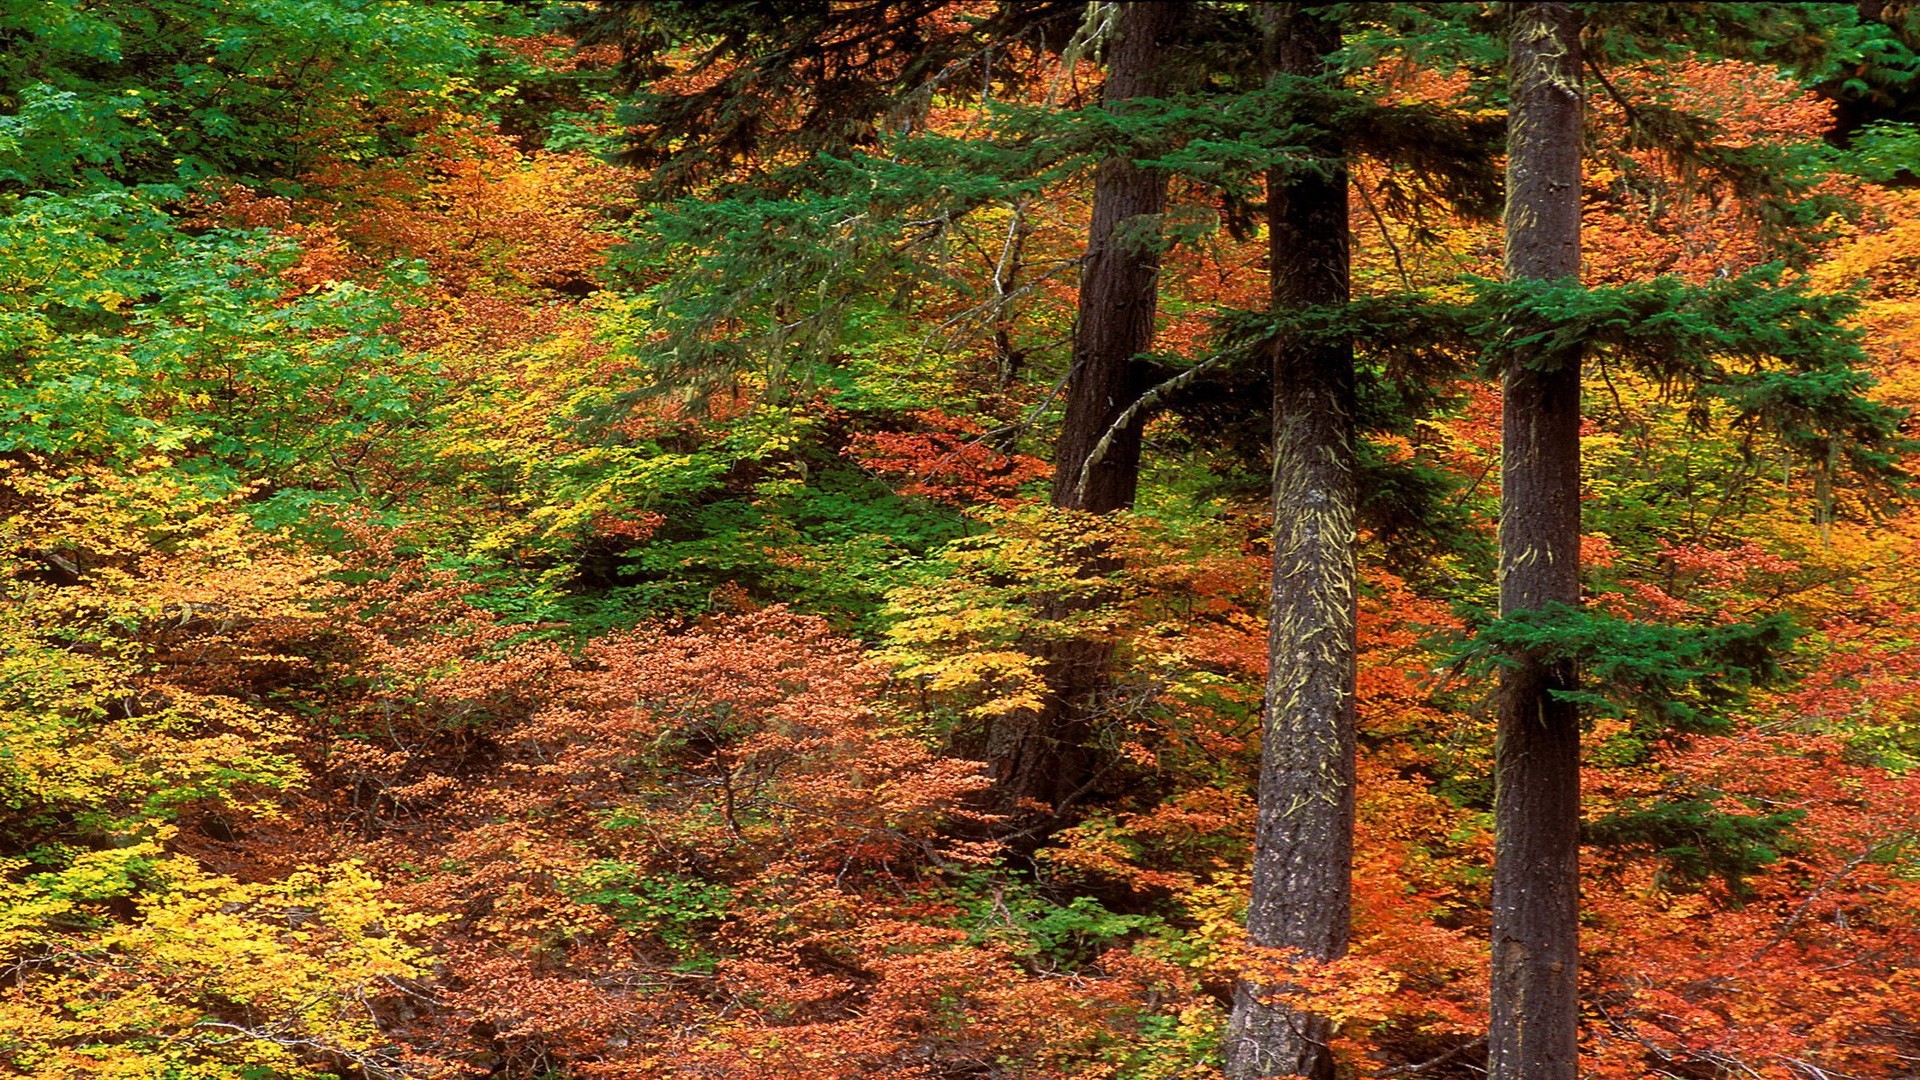 General 1920x1080 fall nature red leaves tree trunk